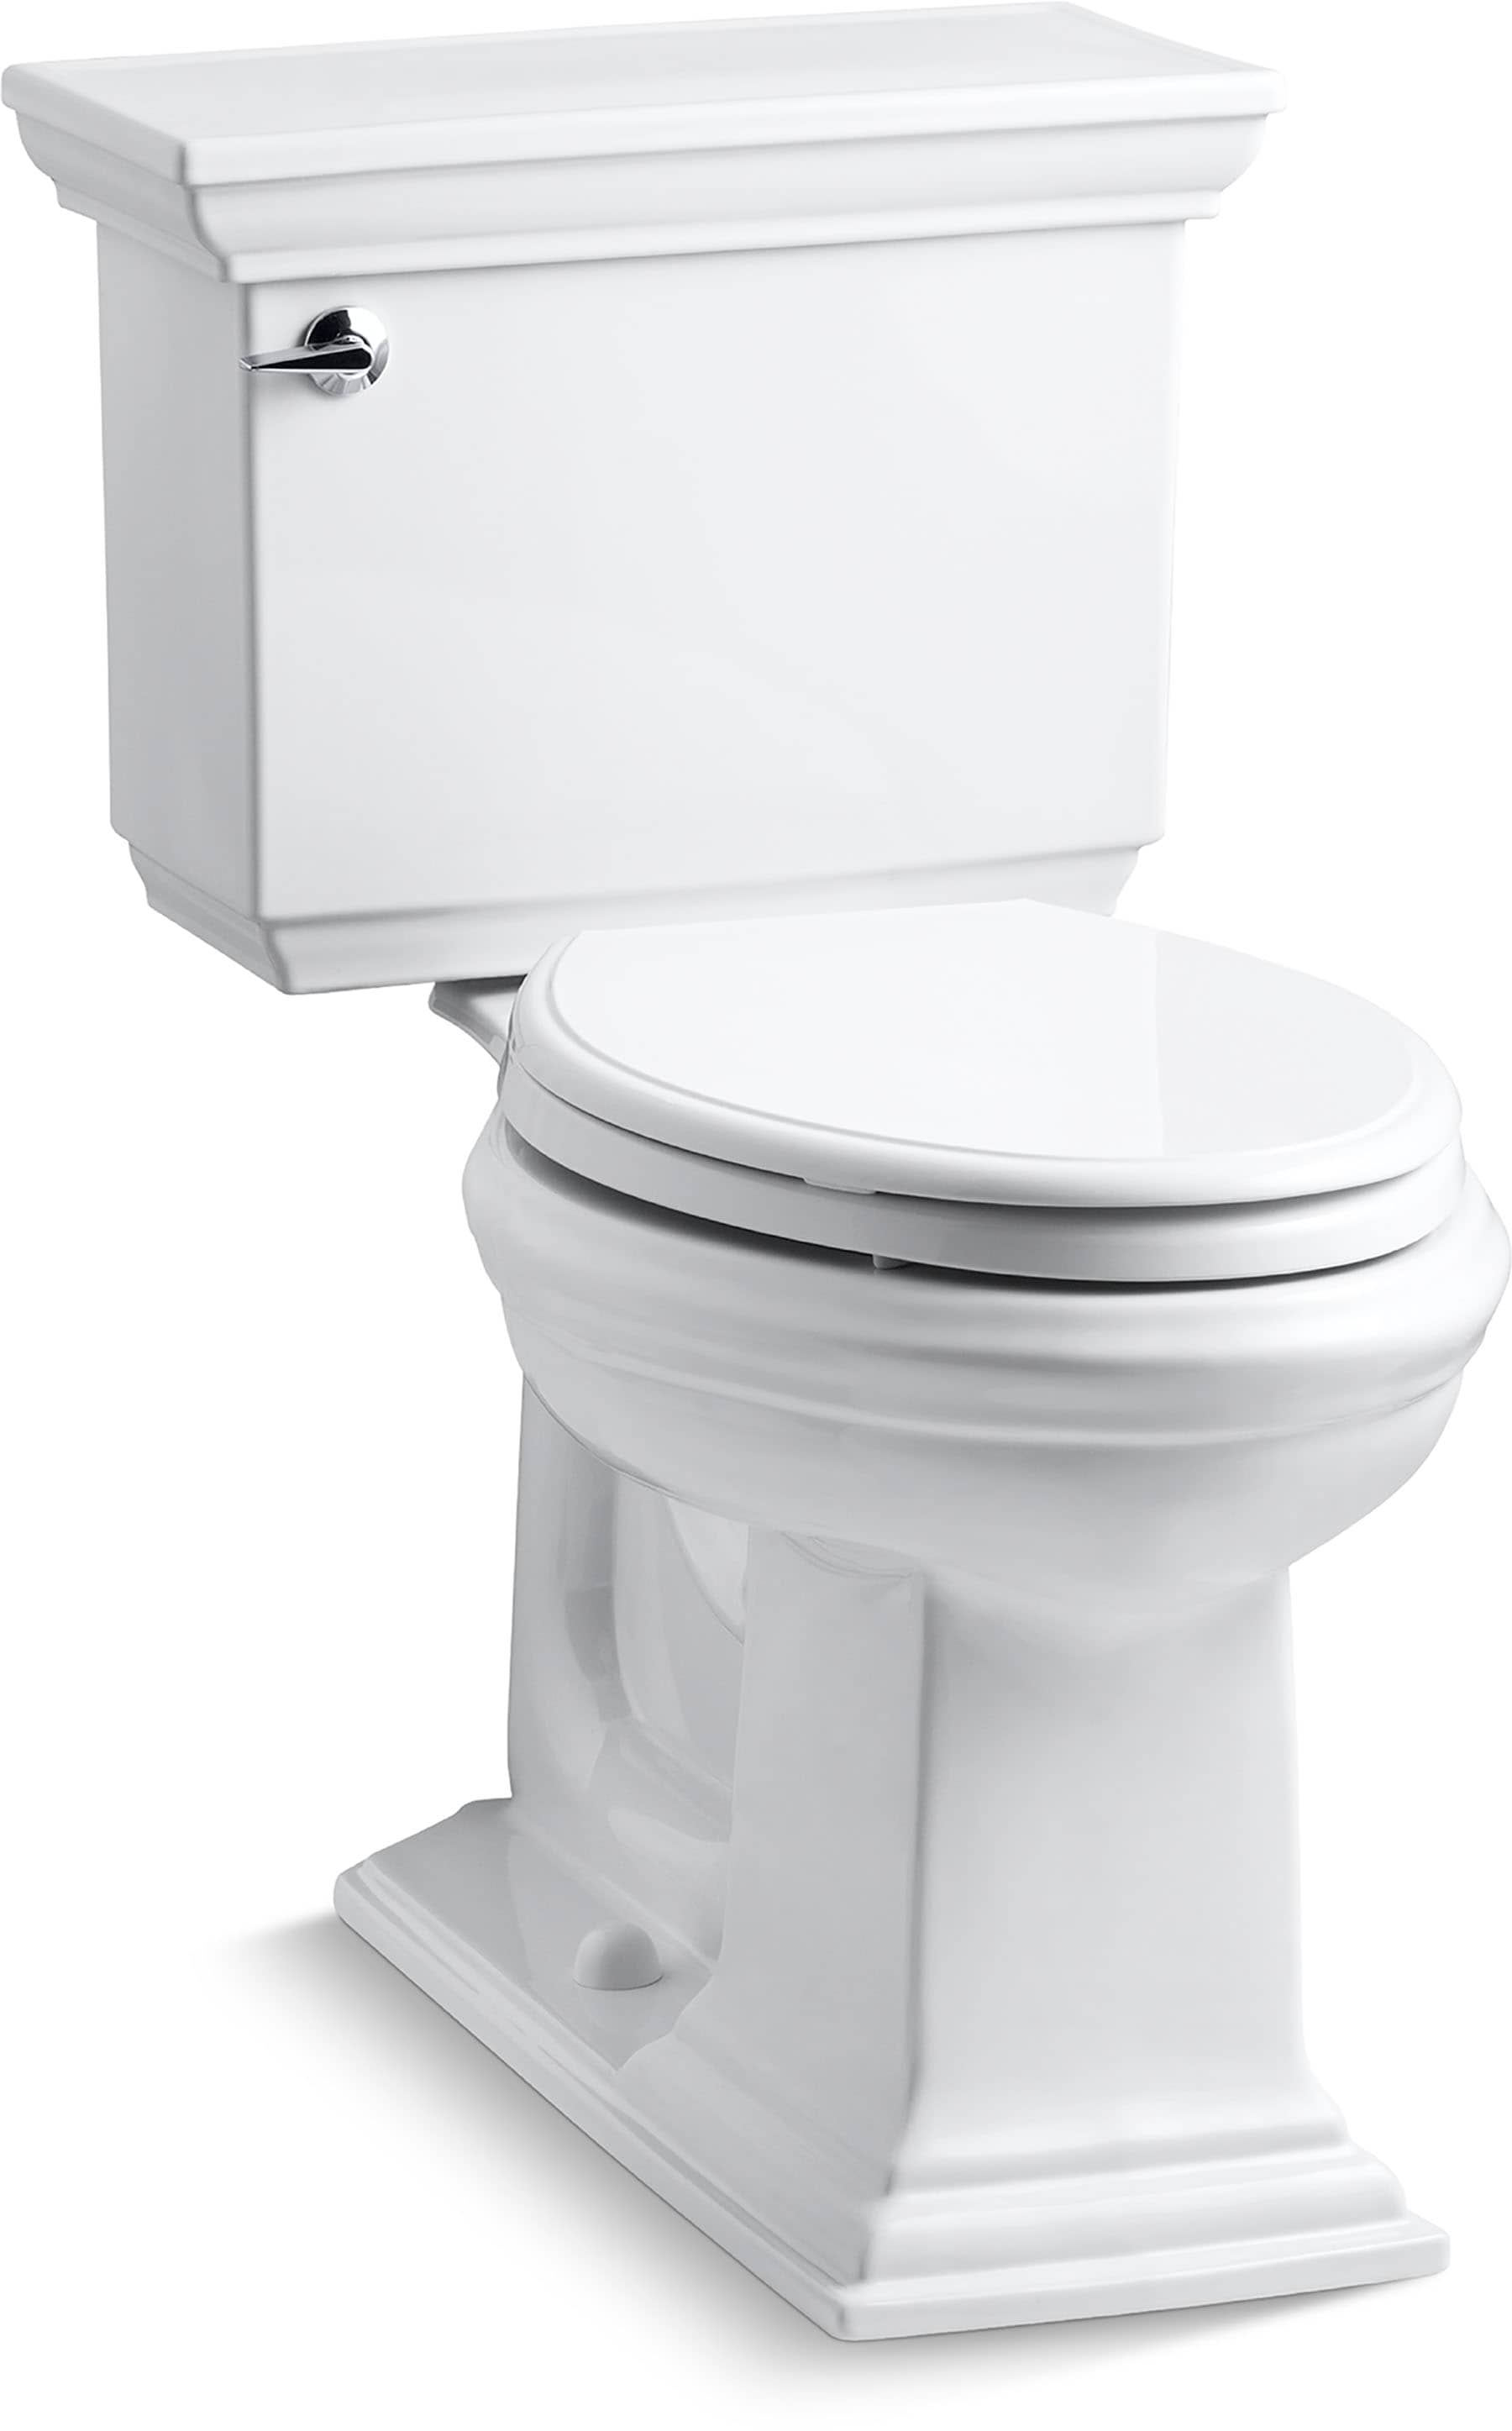 Memoirs White Elongated Chair Height 2-piece WaterSense Soft Close Toilet 12-in Rough-In 1.28-GPF | - KOHLER 98994-0